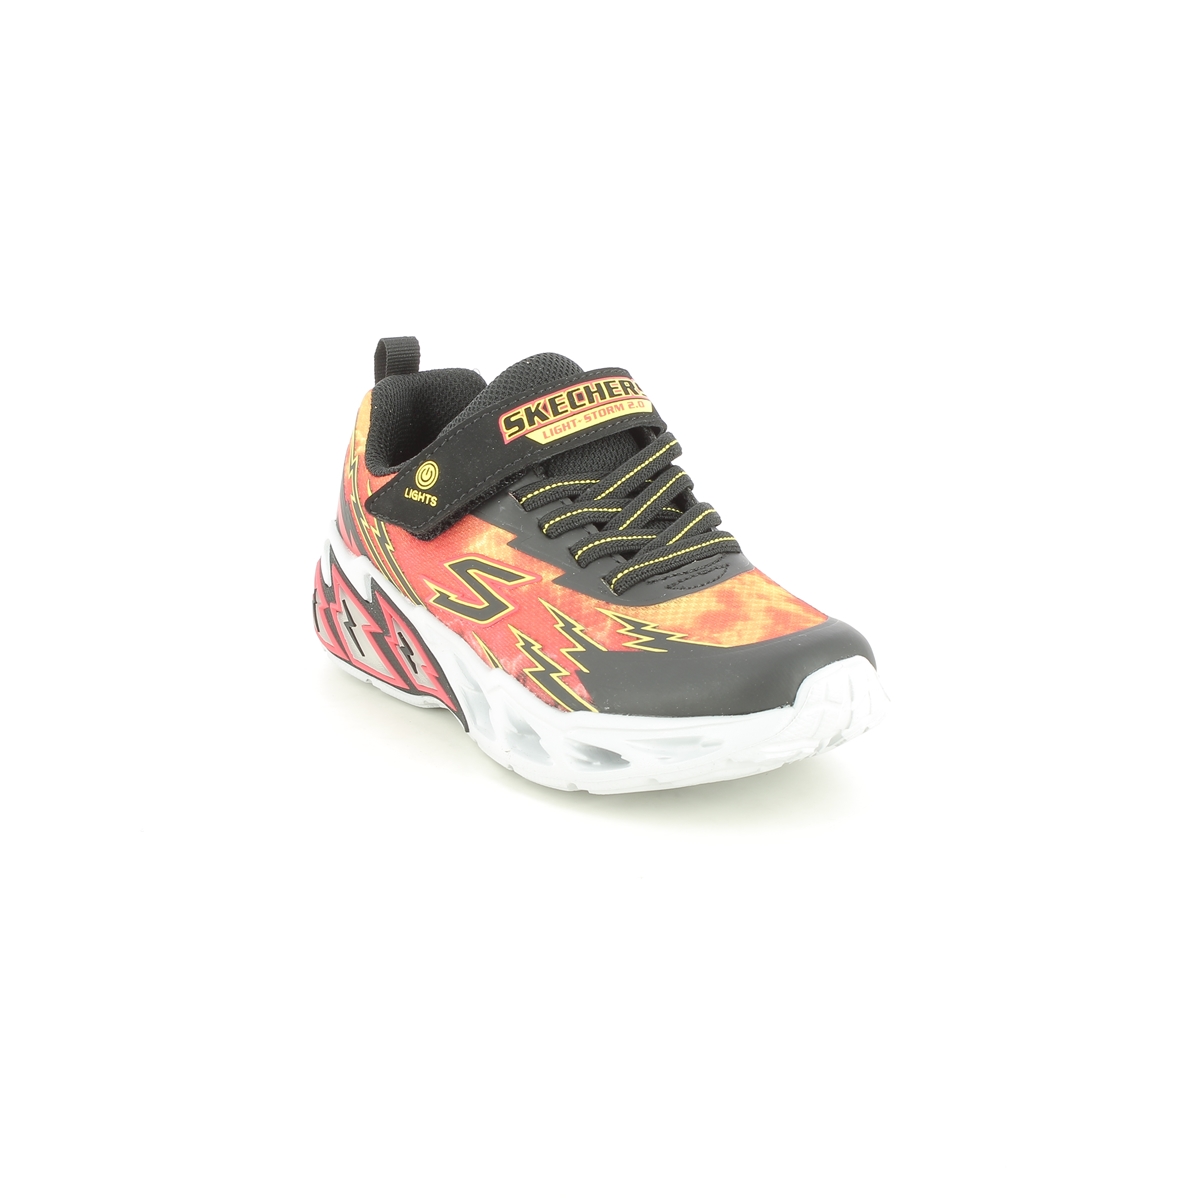 Skechers Light Storm 2.0 Black Red Kids Trainers 400150L In Size 32 In Plain Black Red For kids